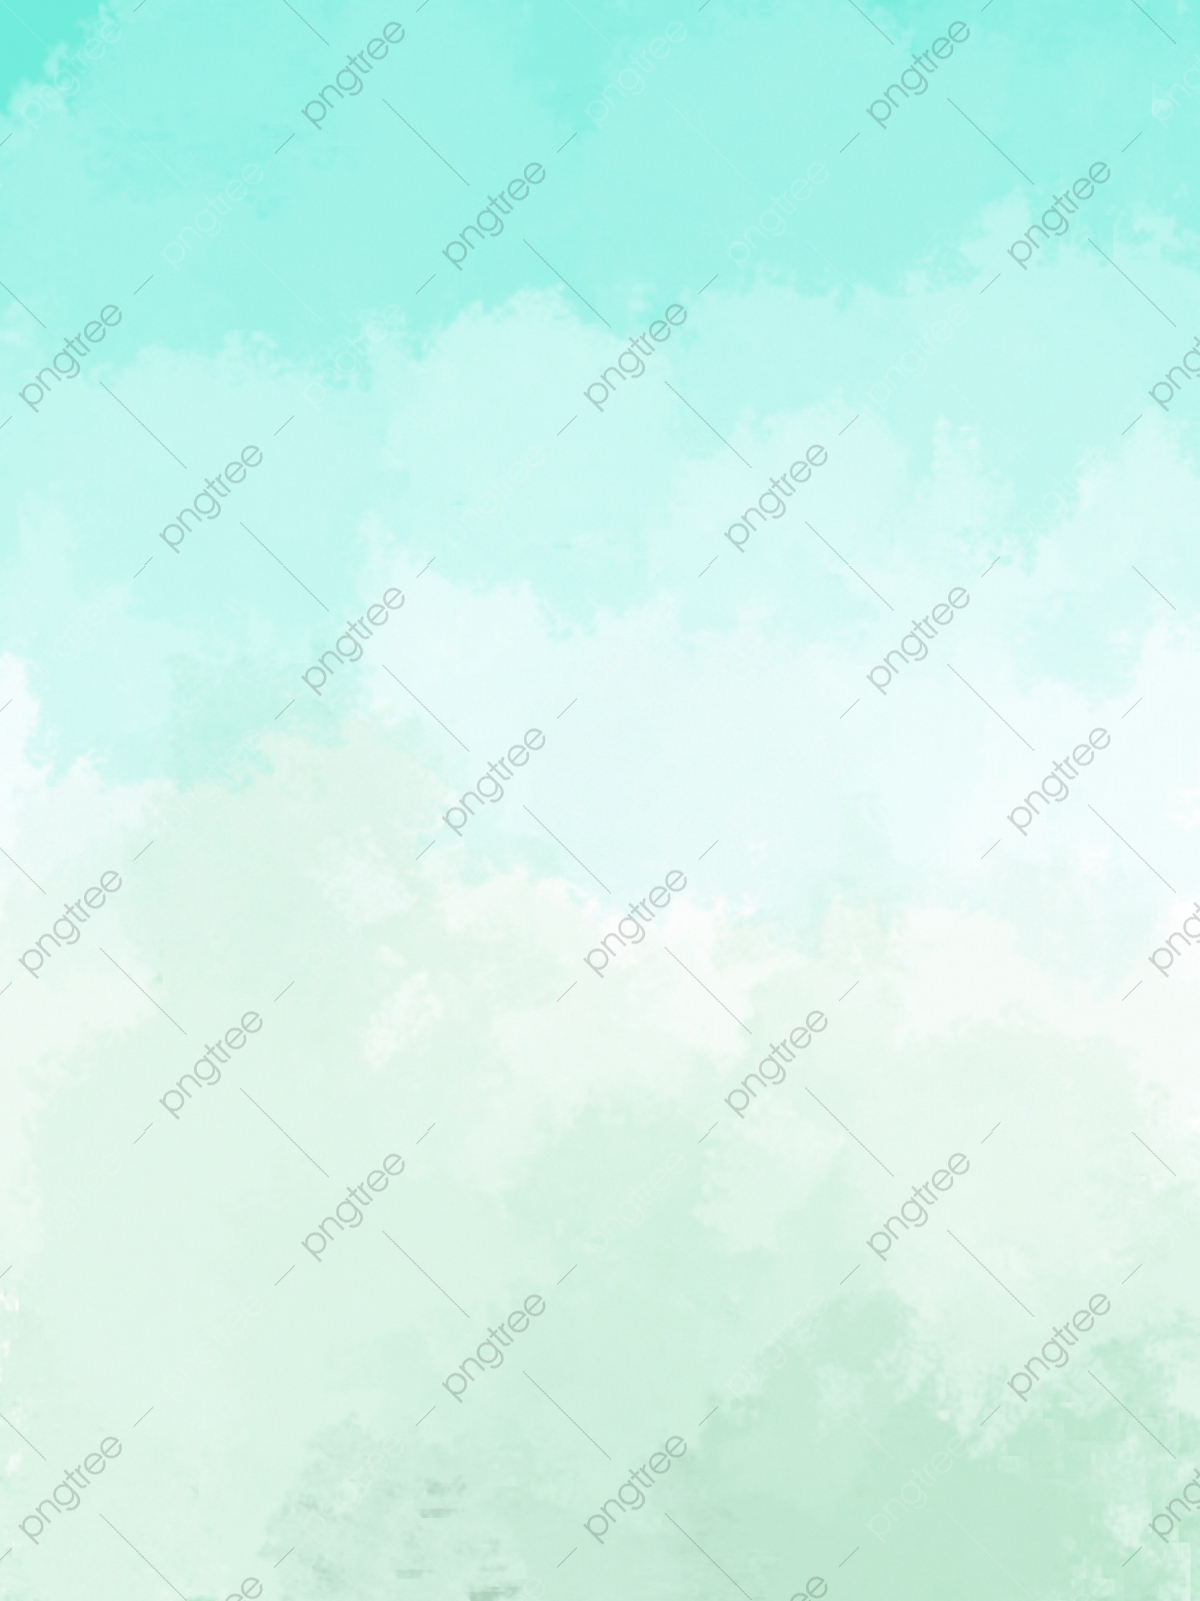 Blue Green Watercolor Background